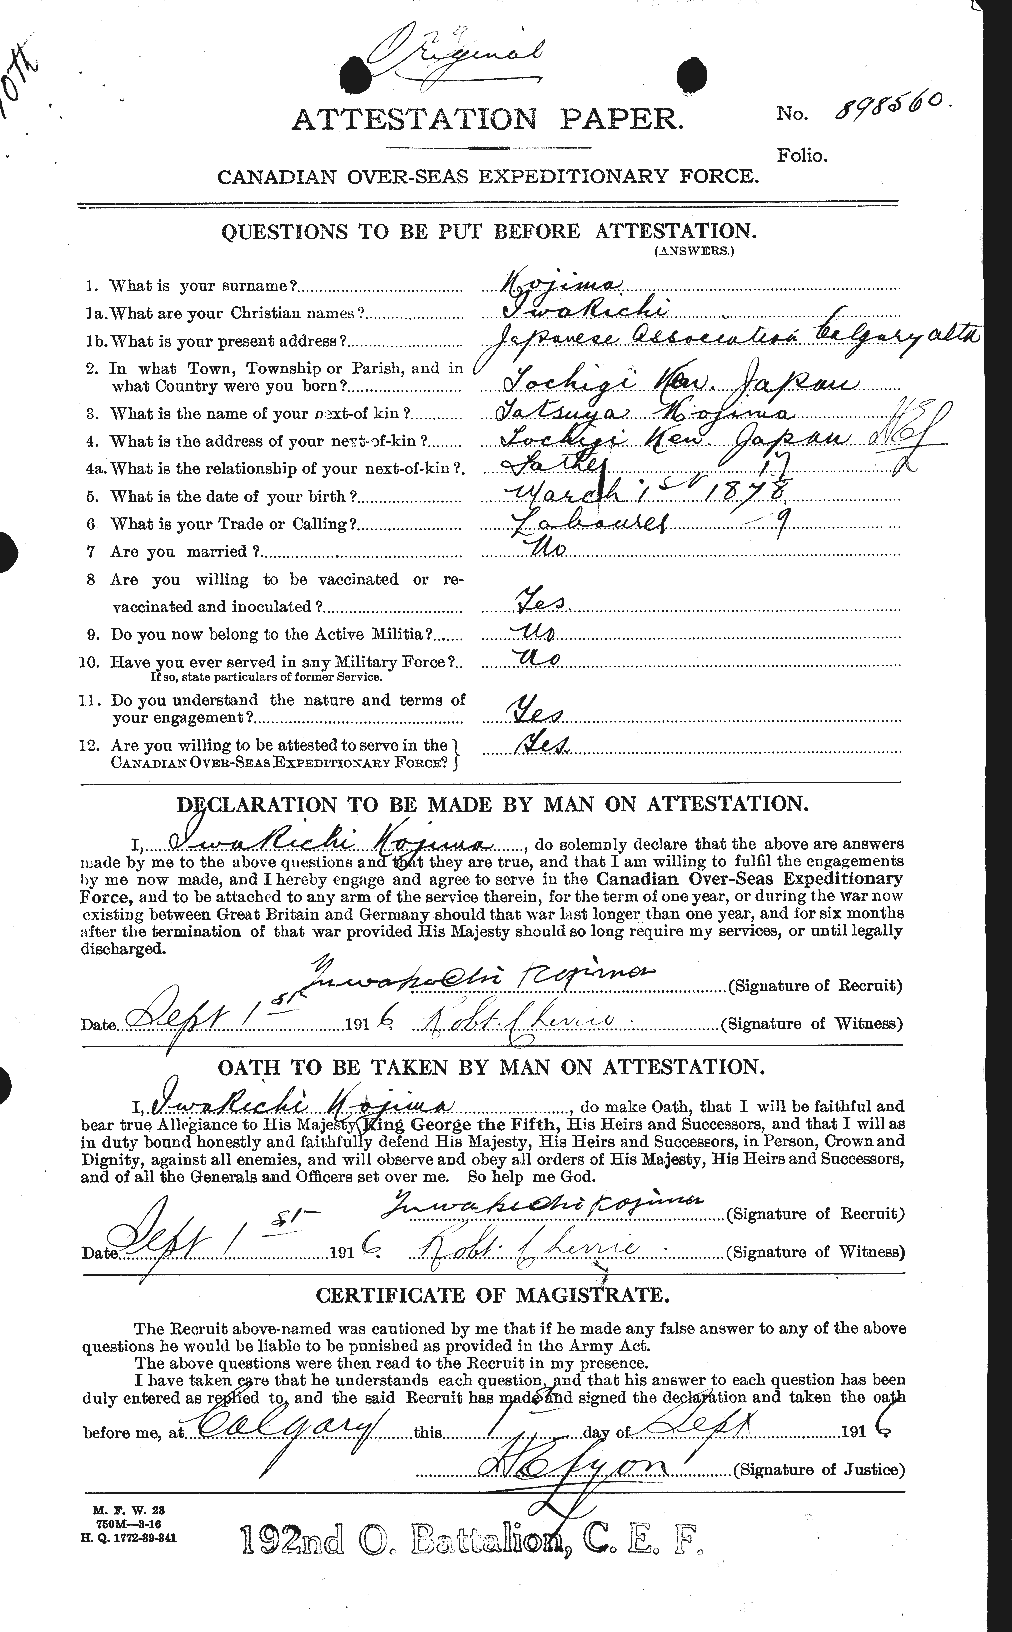 Personnel Records of the First World War - CEF 439806a